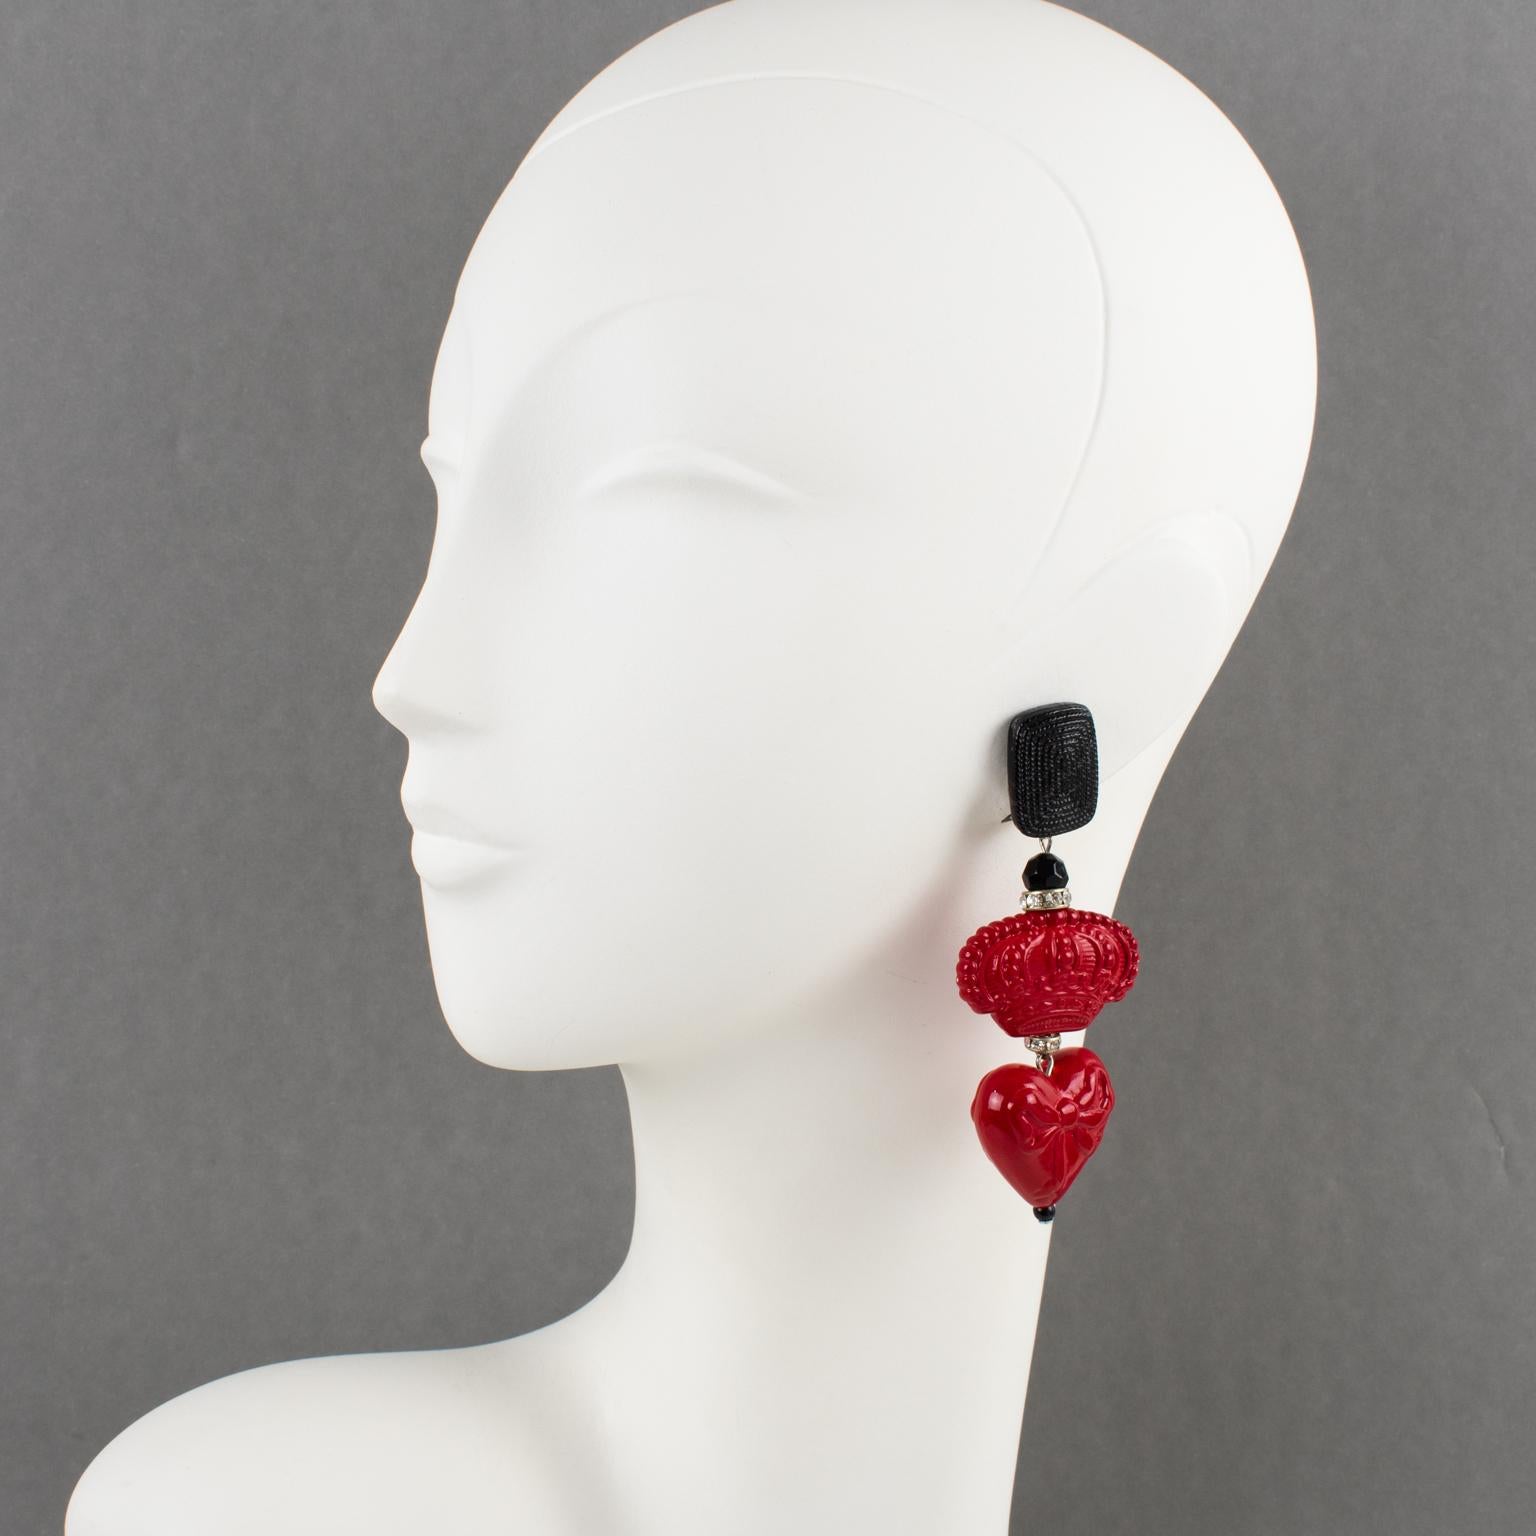 Gorgeous Angela Caputi, made in Italy resin clip-on earrings. Oversized dangling shape with red and black elements compliments with tiny crystal rhinestones ring. The red elements are a dimensional heart with a carved bow and a carved crown. Her